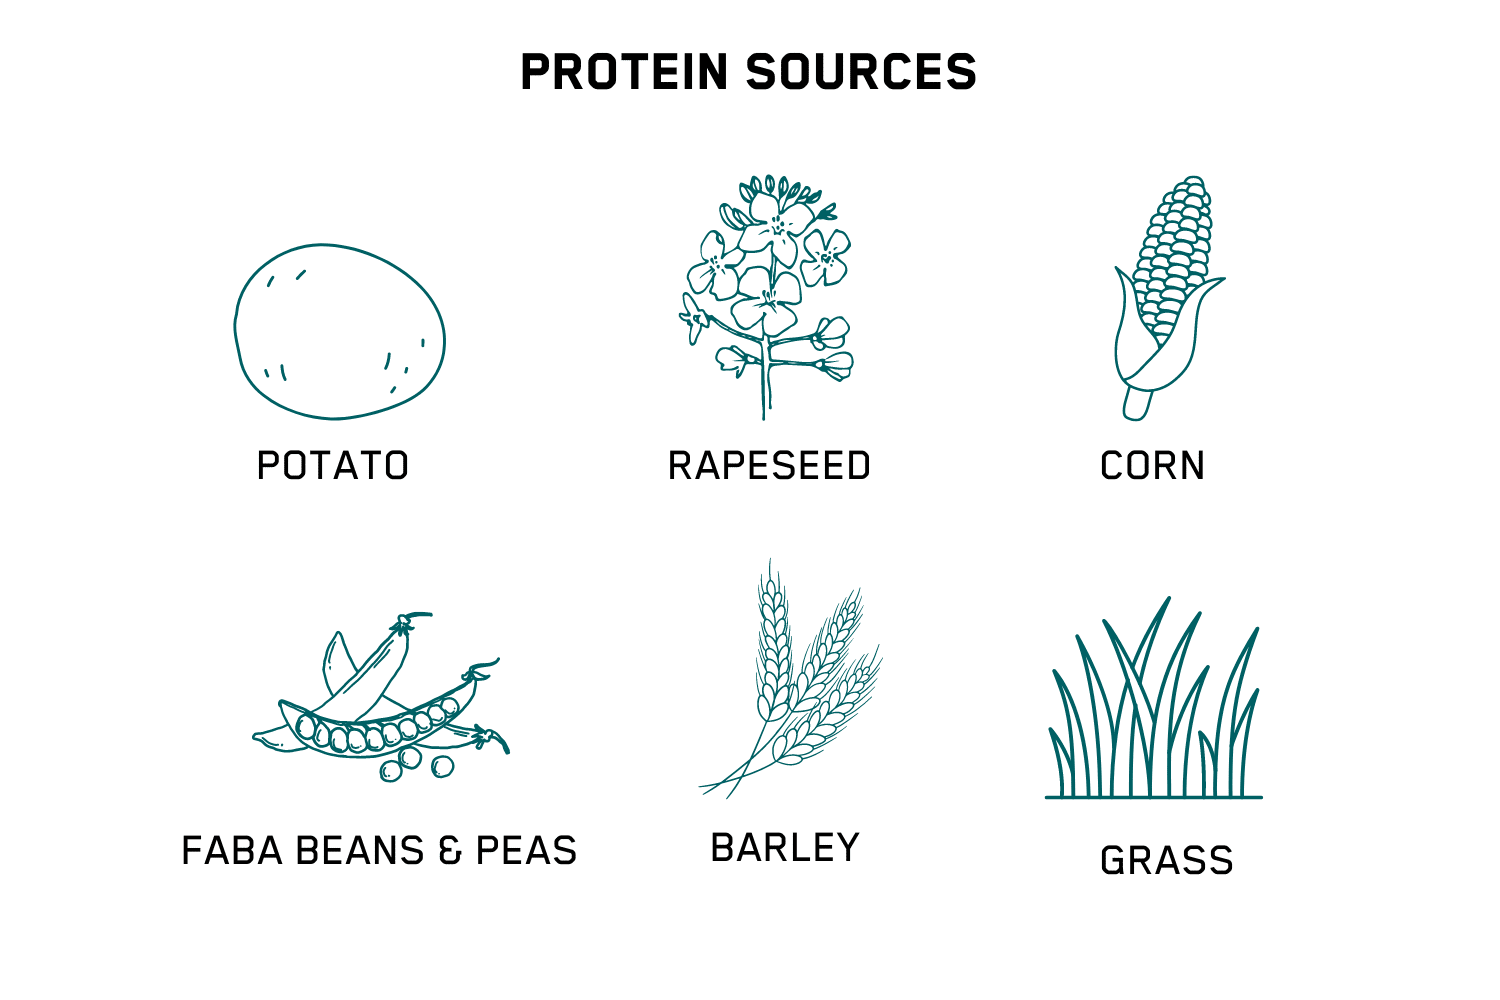 Alternative protein sources for pig feed tested